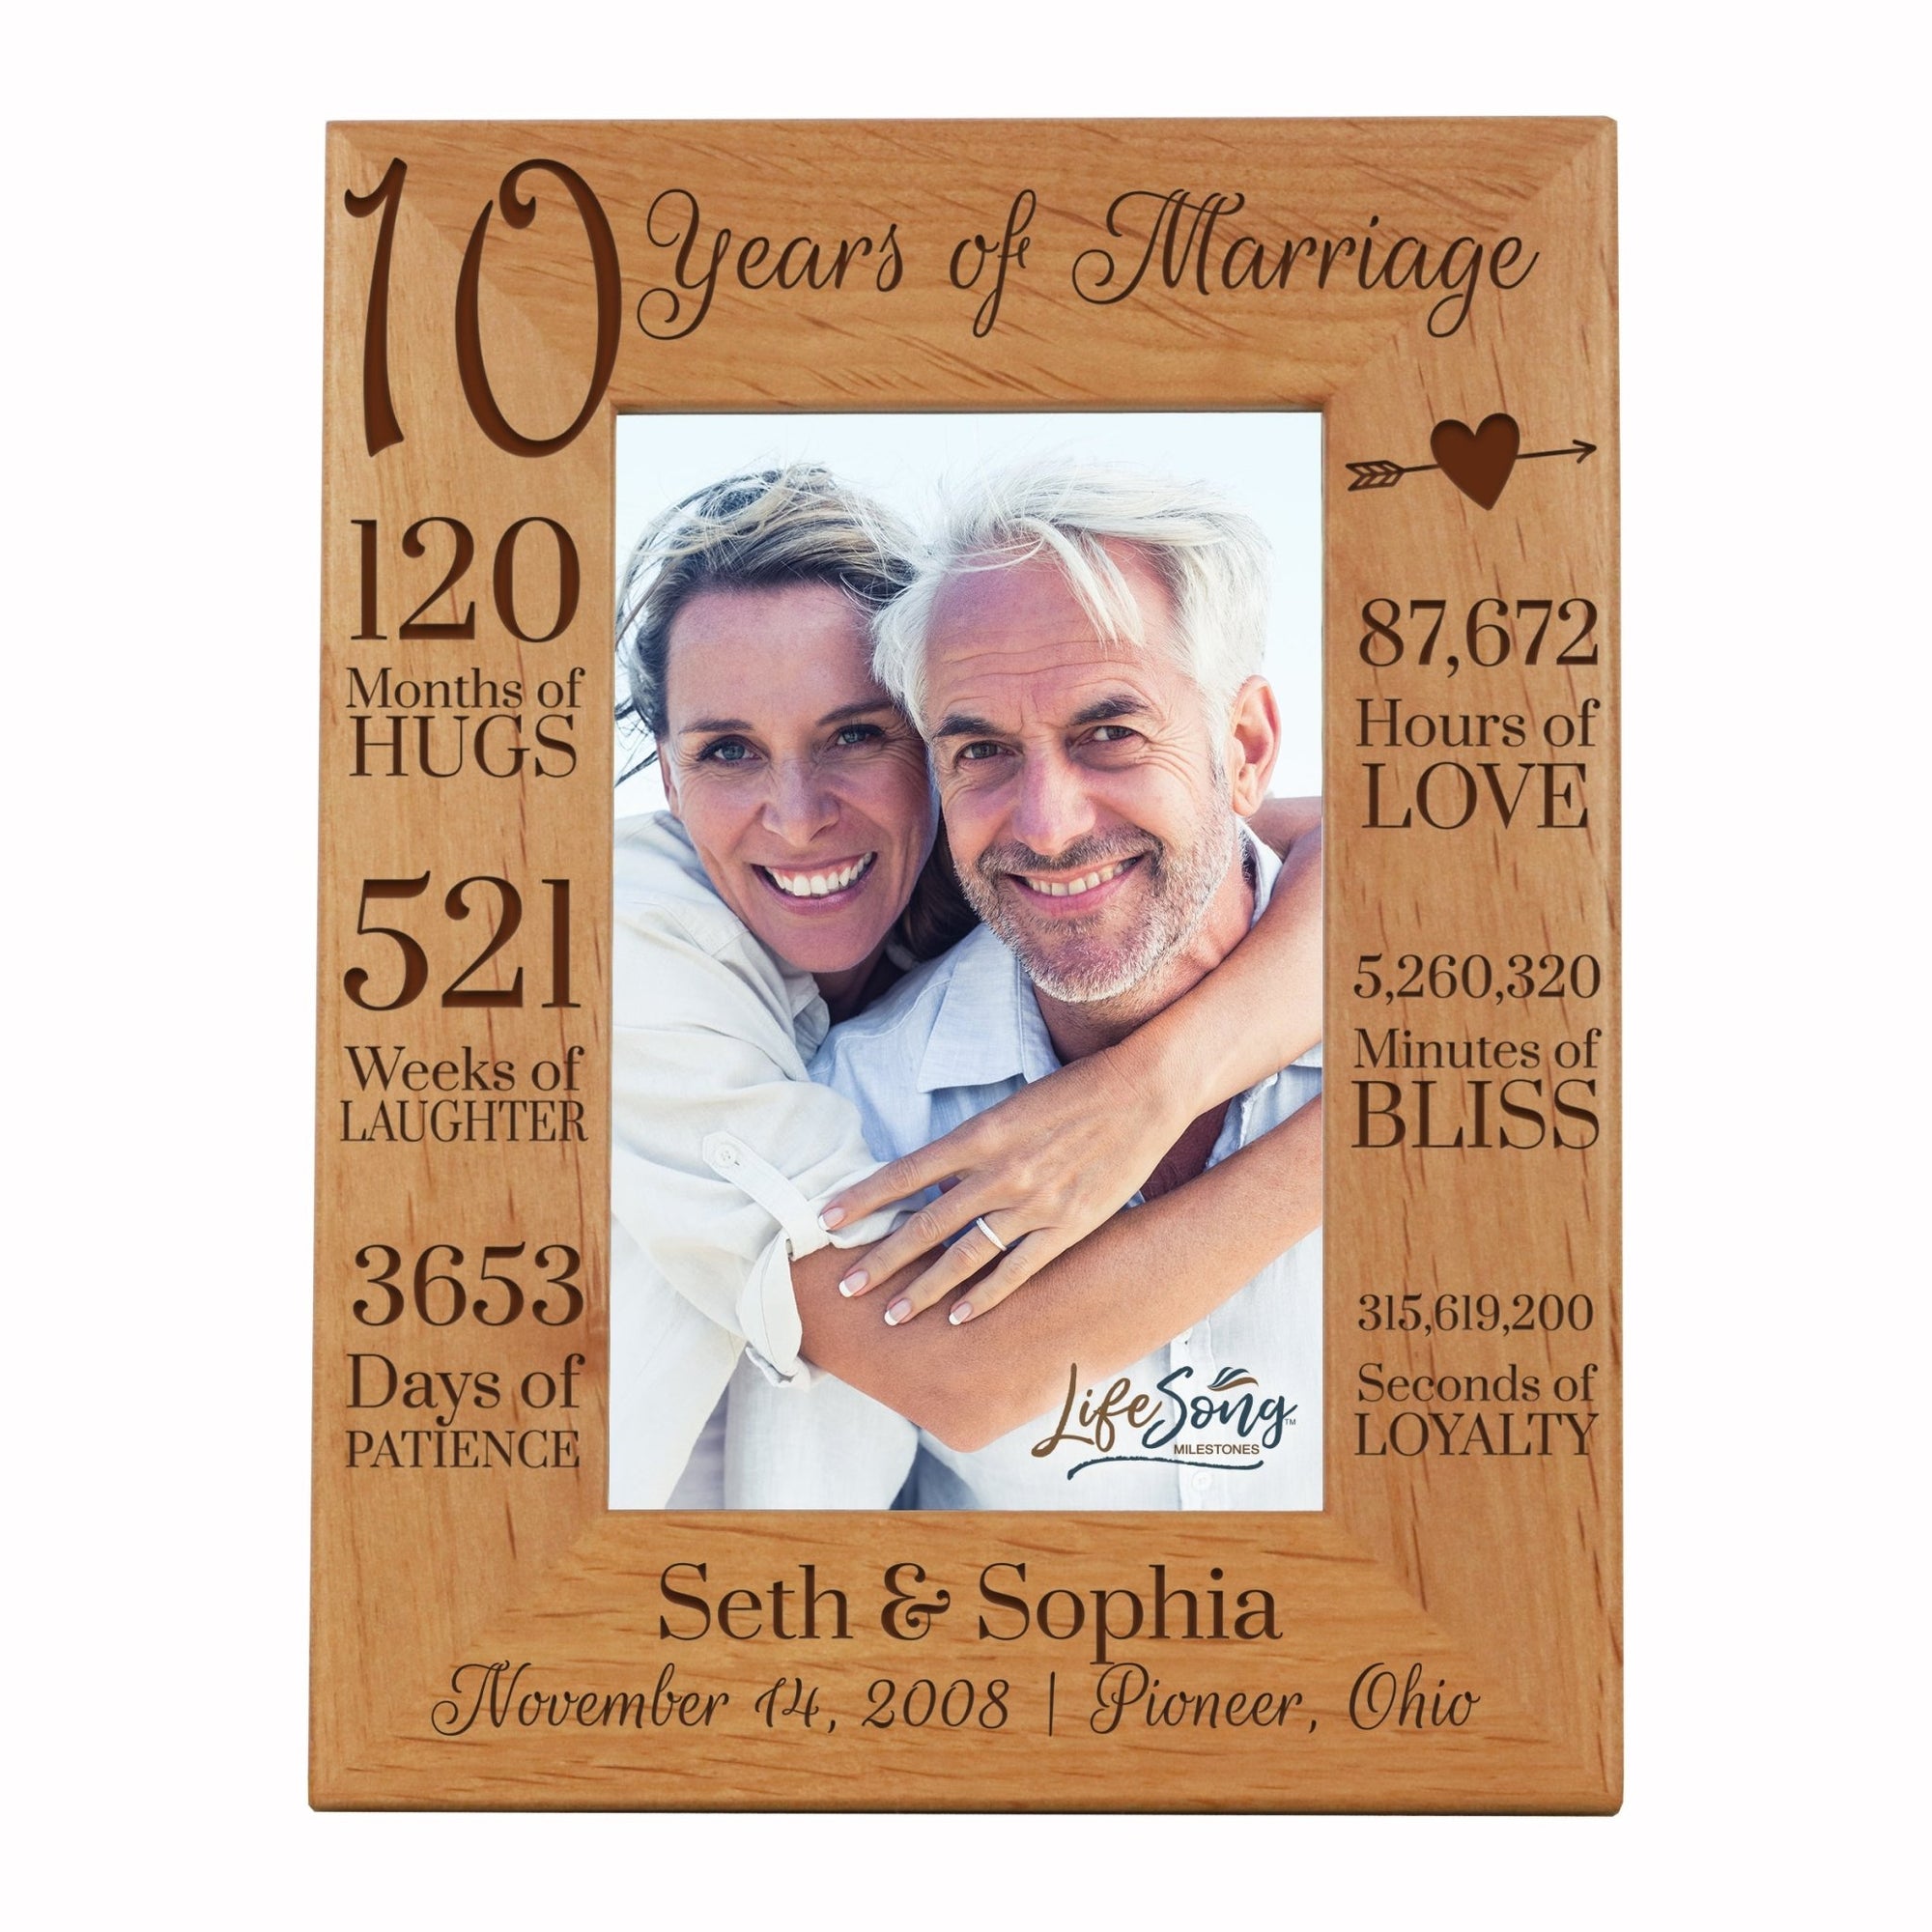 Lifesong Milestones Personalized Engraved 10th Anniversary Photo Frame Gift for Couples